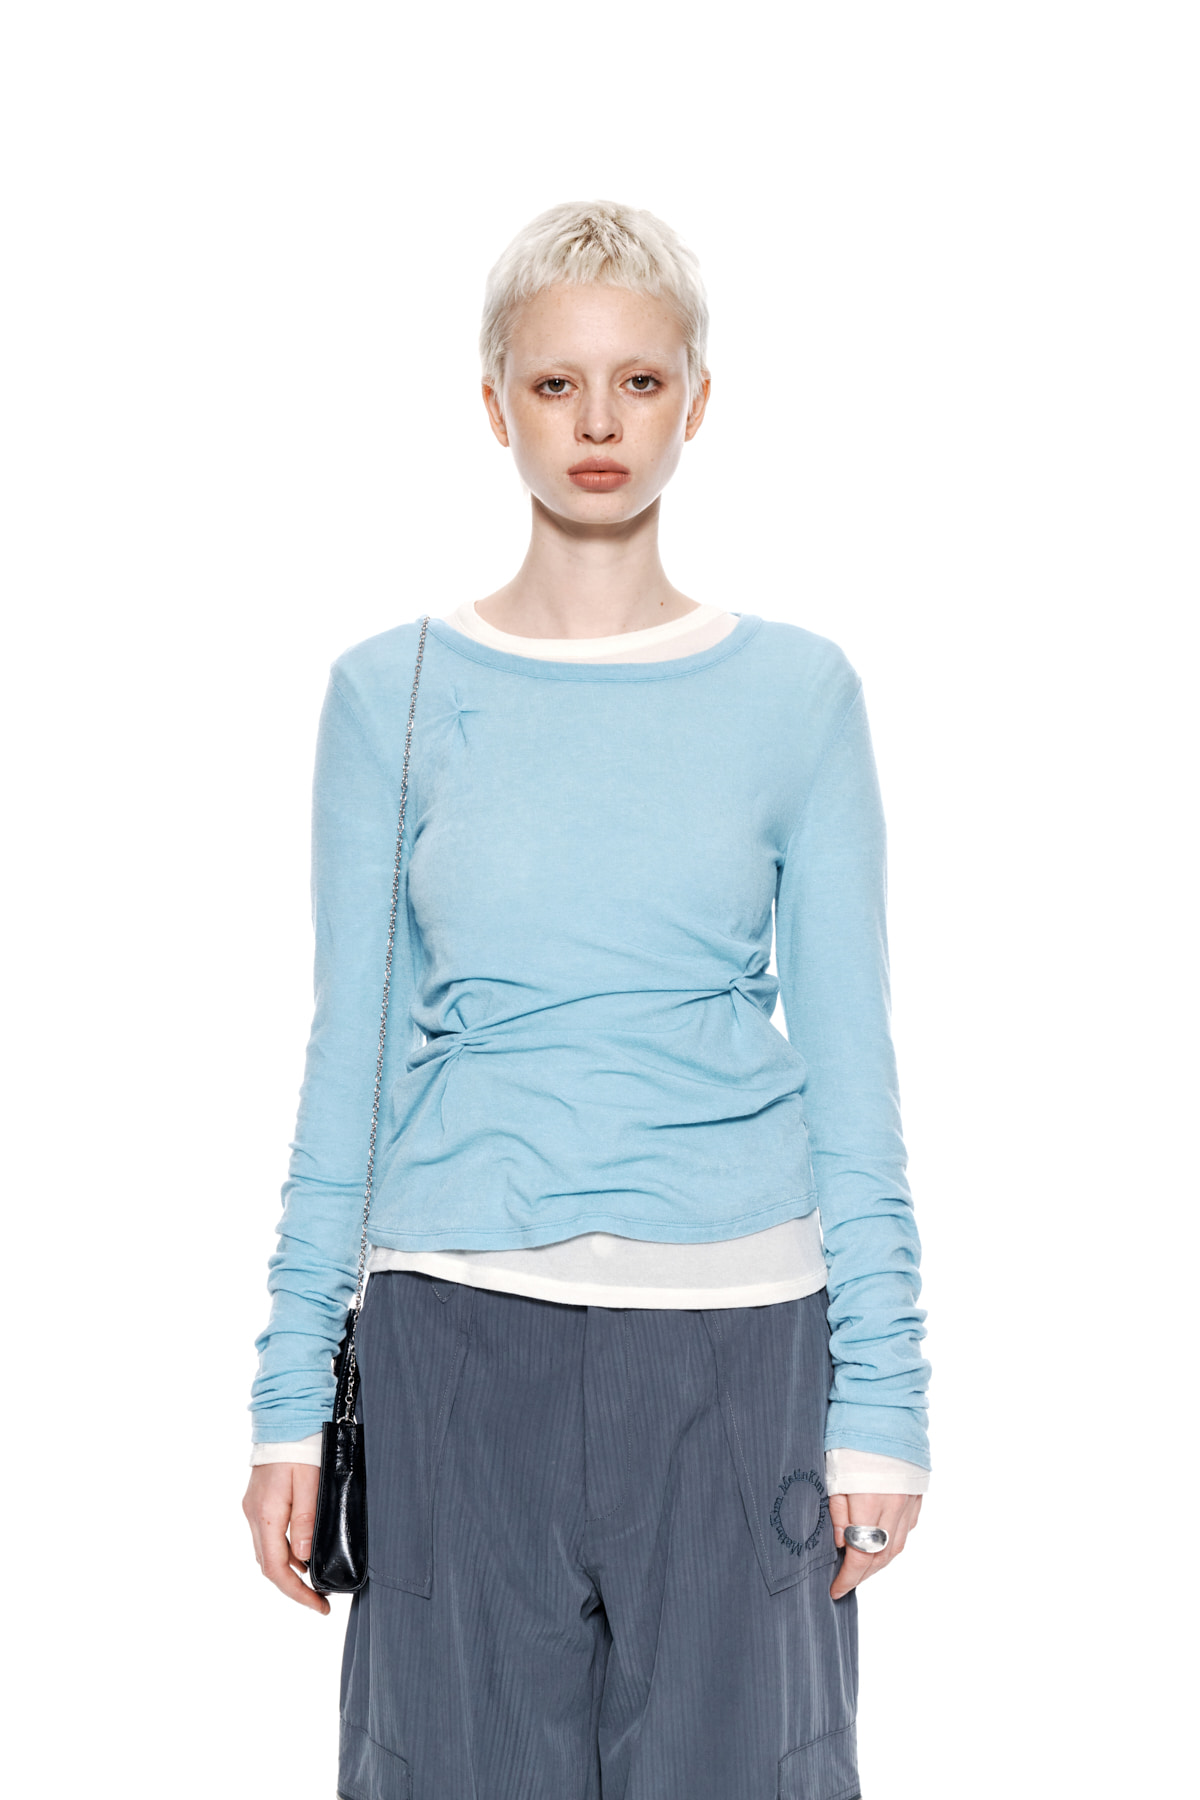 PINCHED SLIM TOP IN SKY